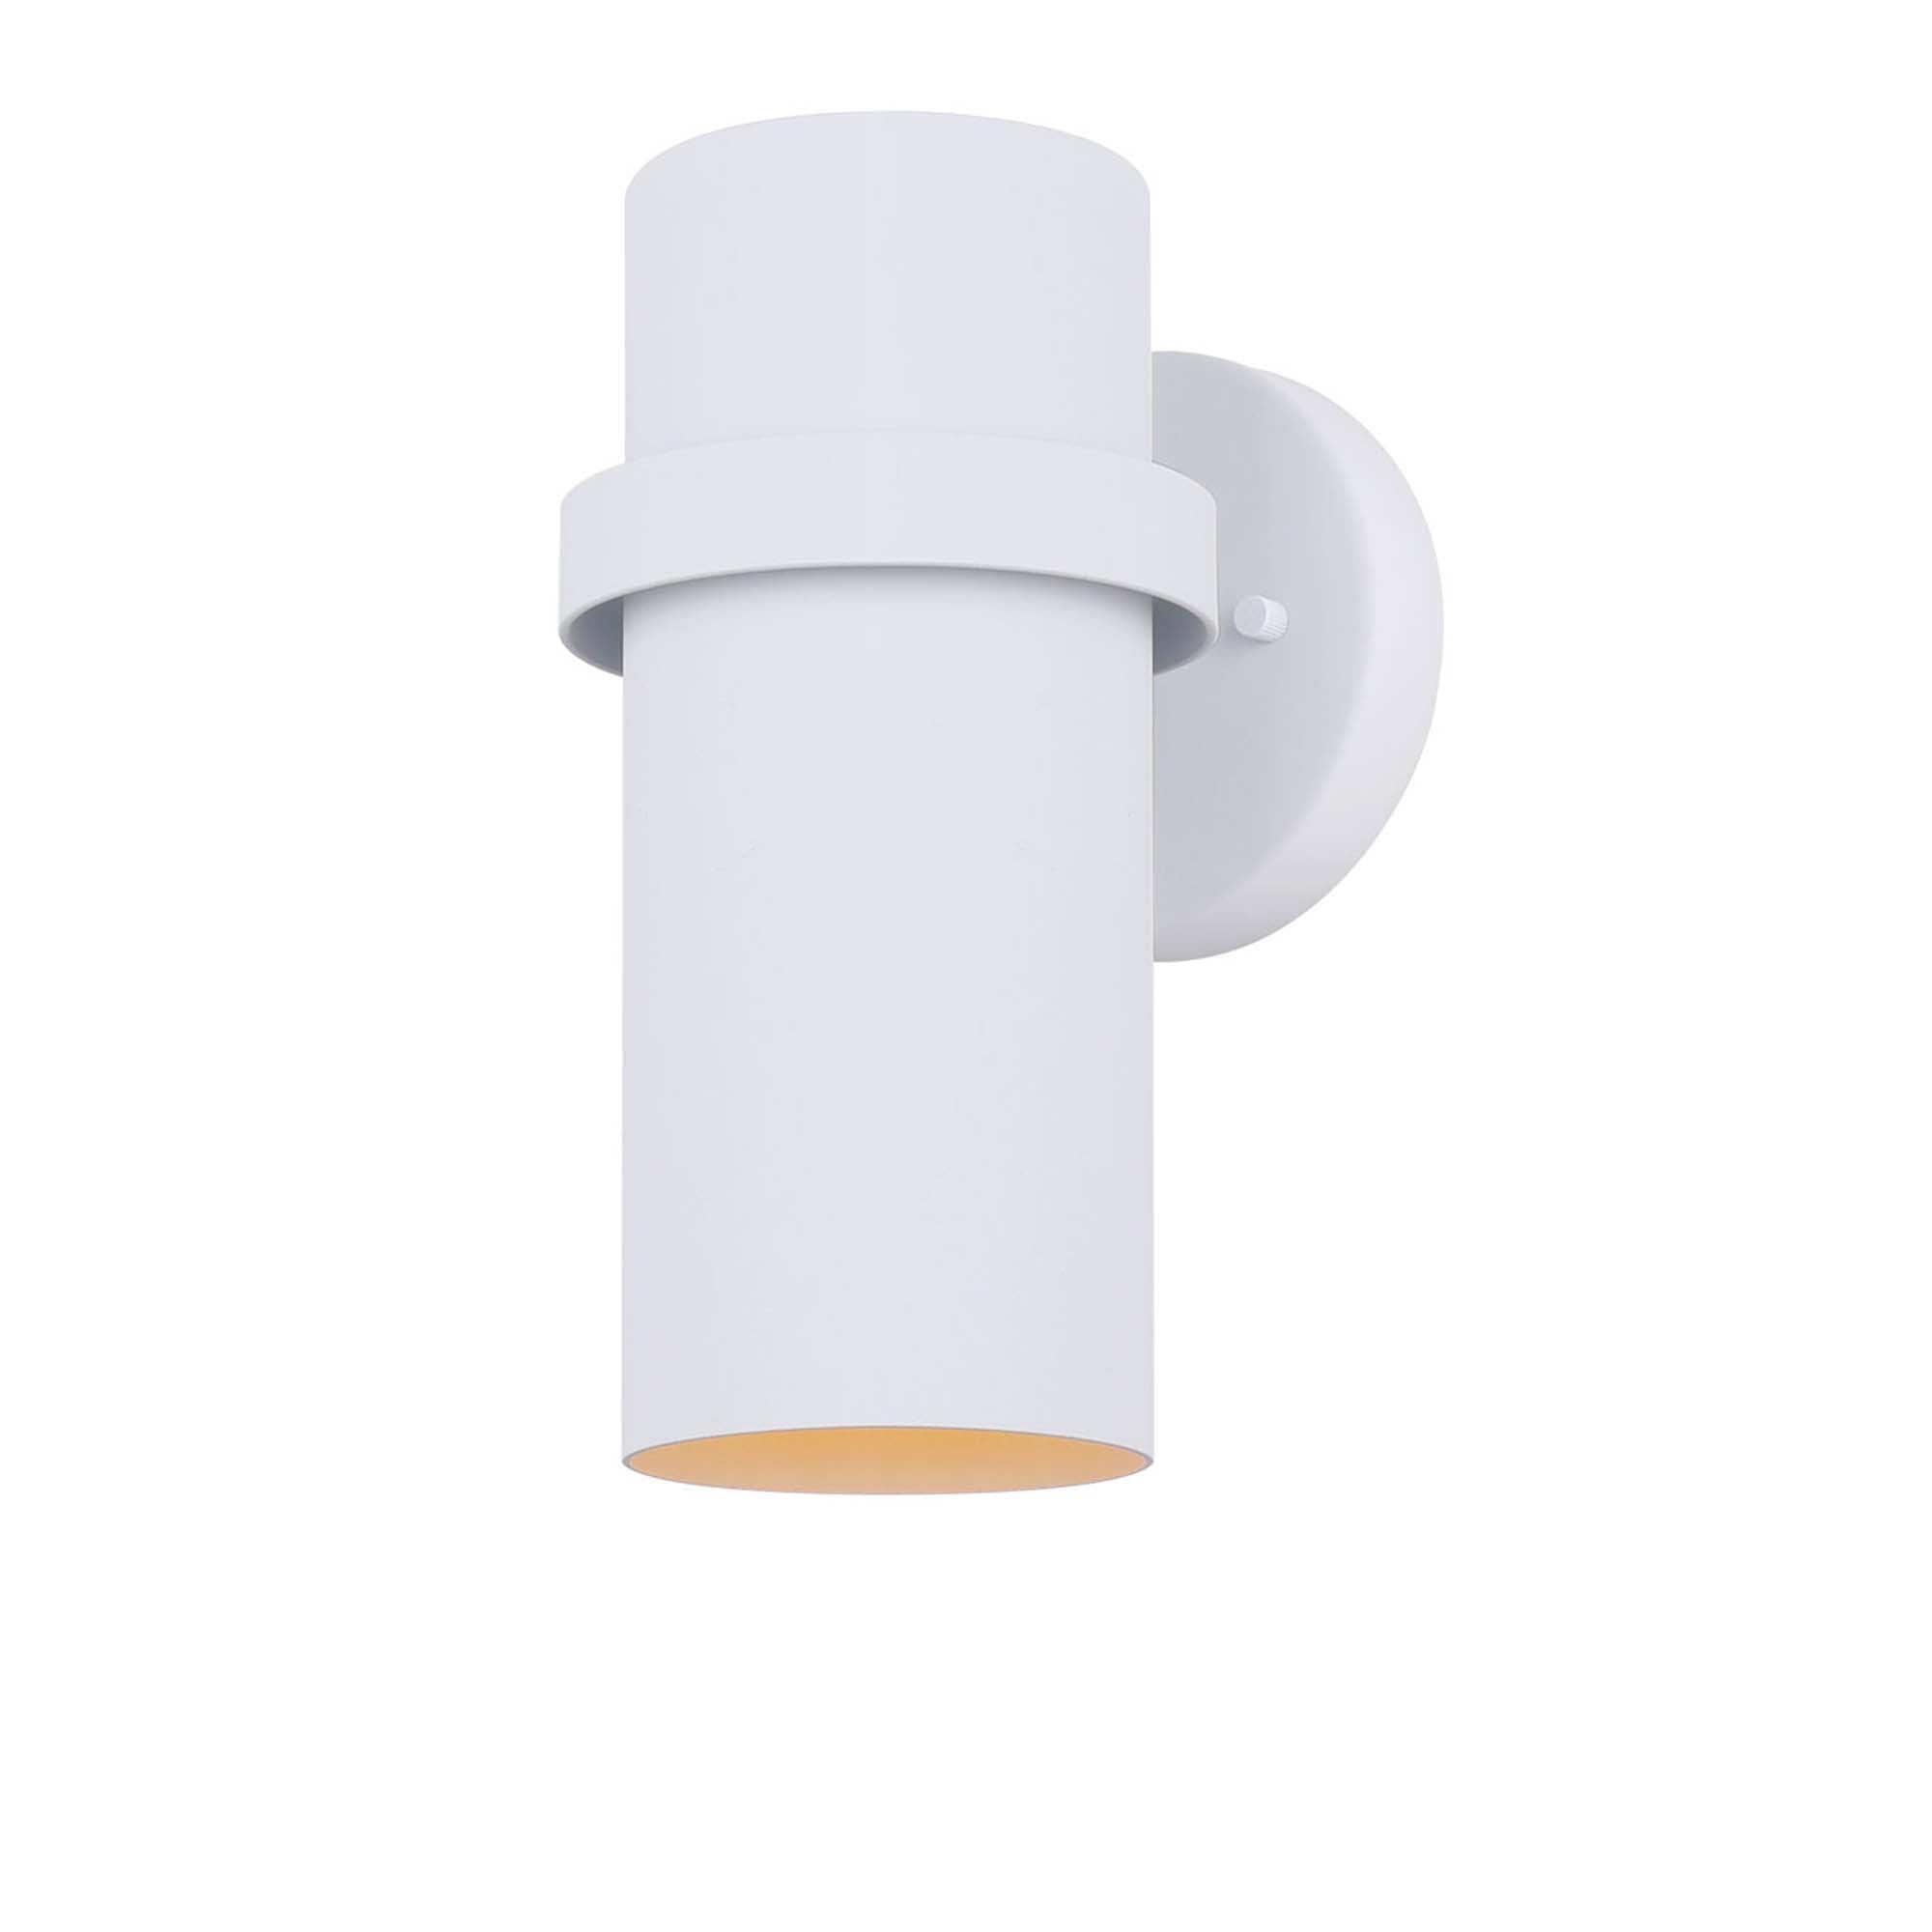 GAVI Outdoor wall sconce White - IOL516WH | CANARM